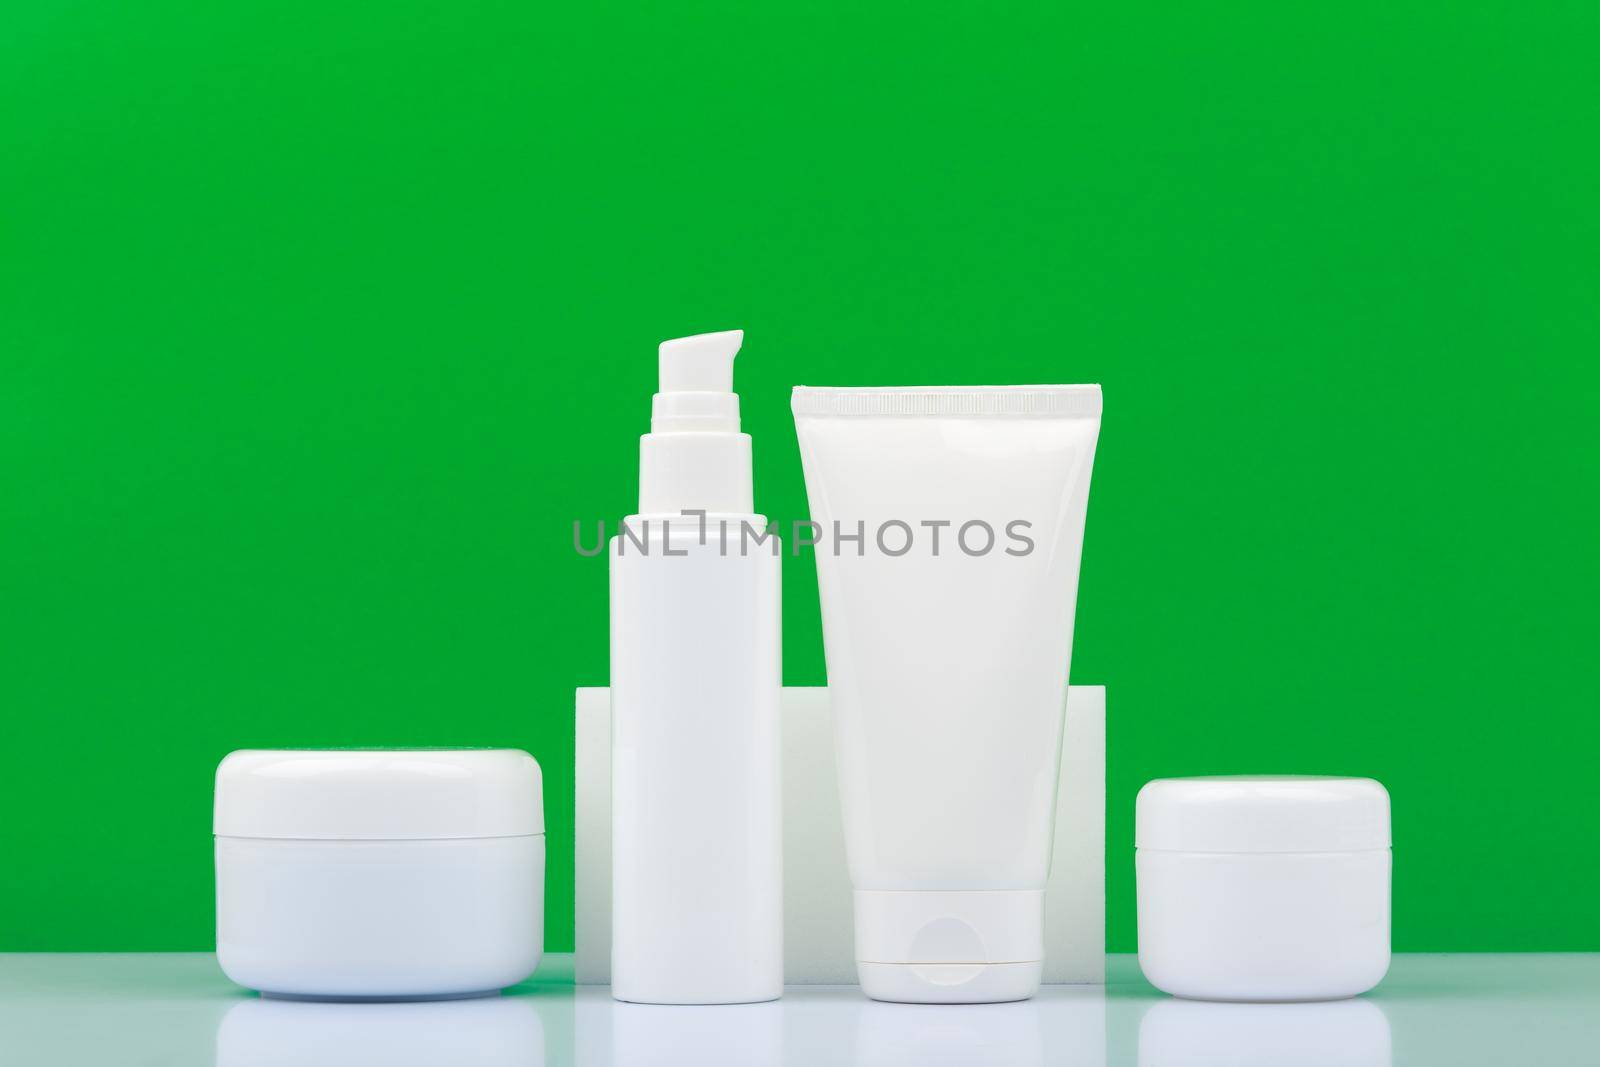 Set of cosmetic products for daily skin care on white table against green background. Concept of organic cosmetics with natural ingredients and oils. Beauty products with aloe vera or green tea 